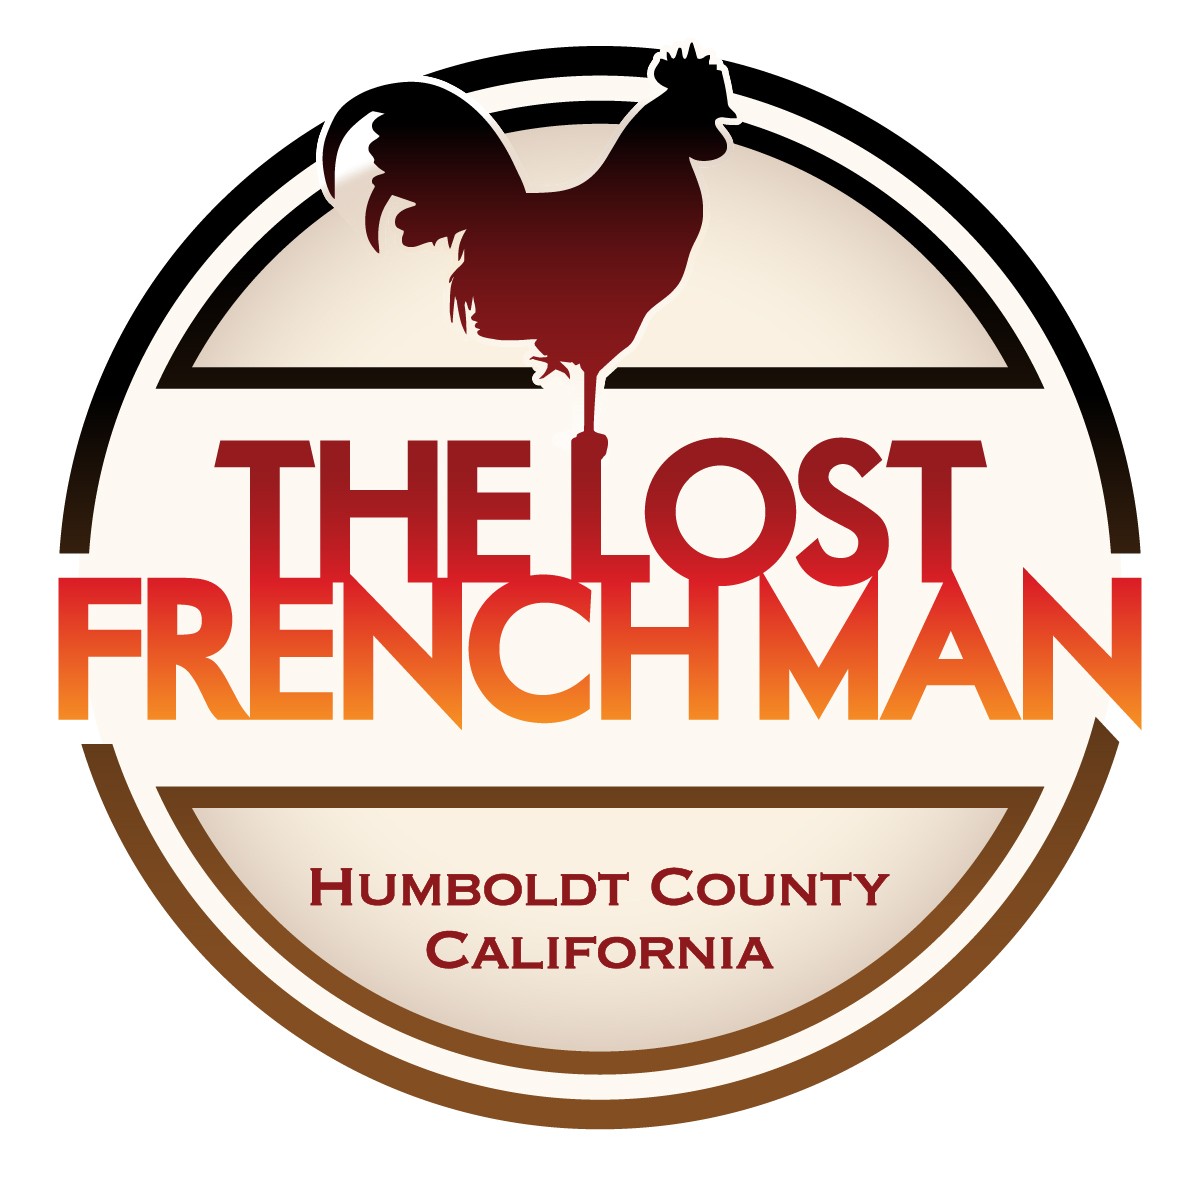 The Lost French Man 3344 Redwood Drive